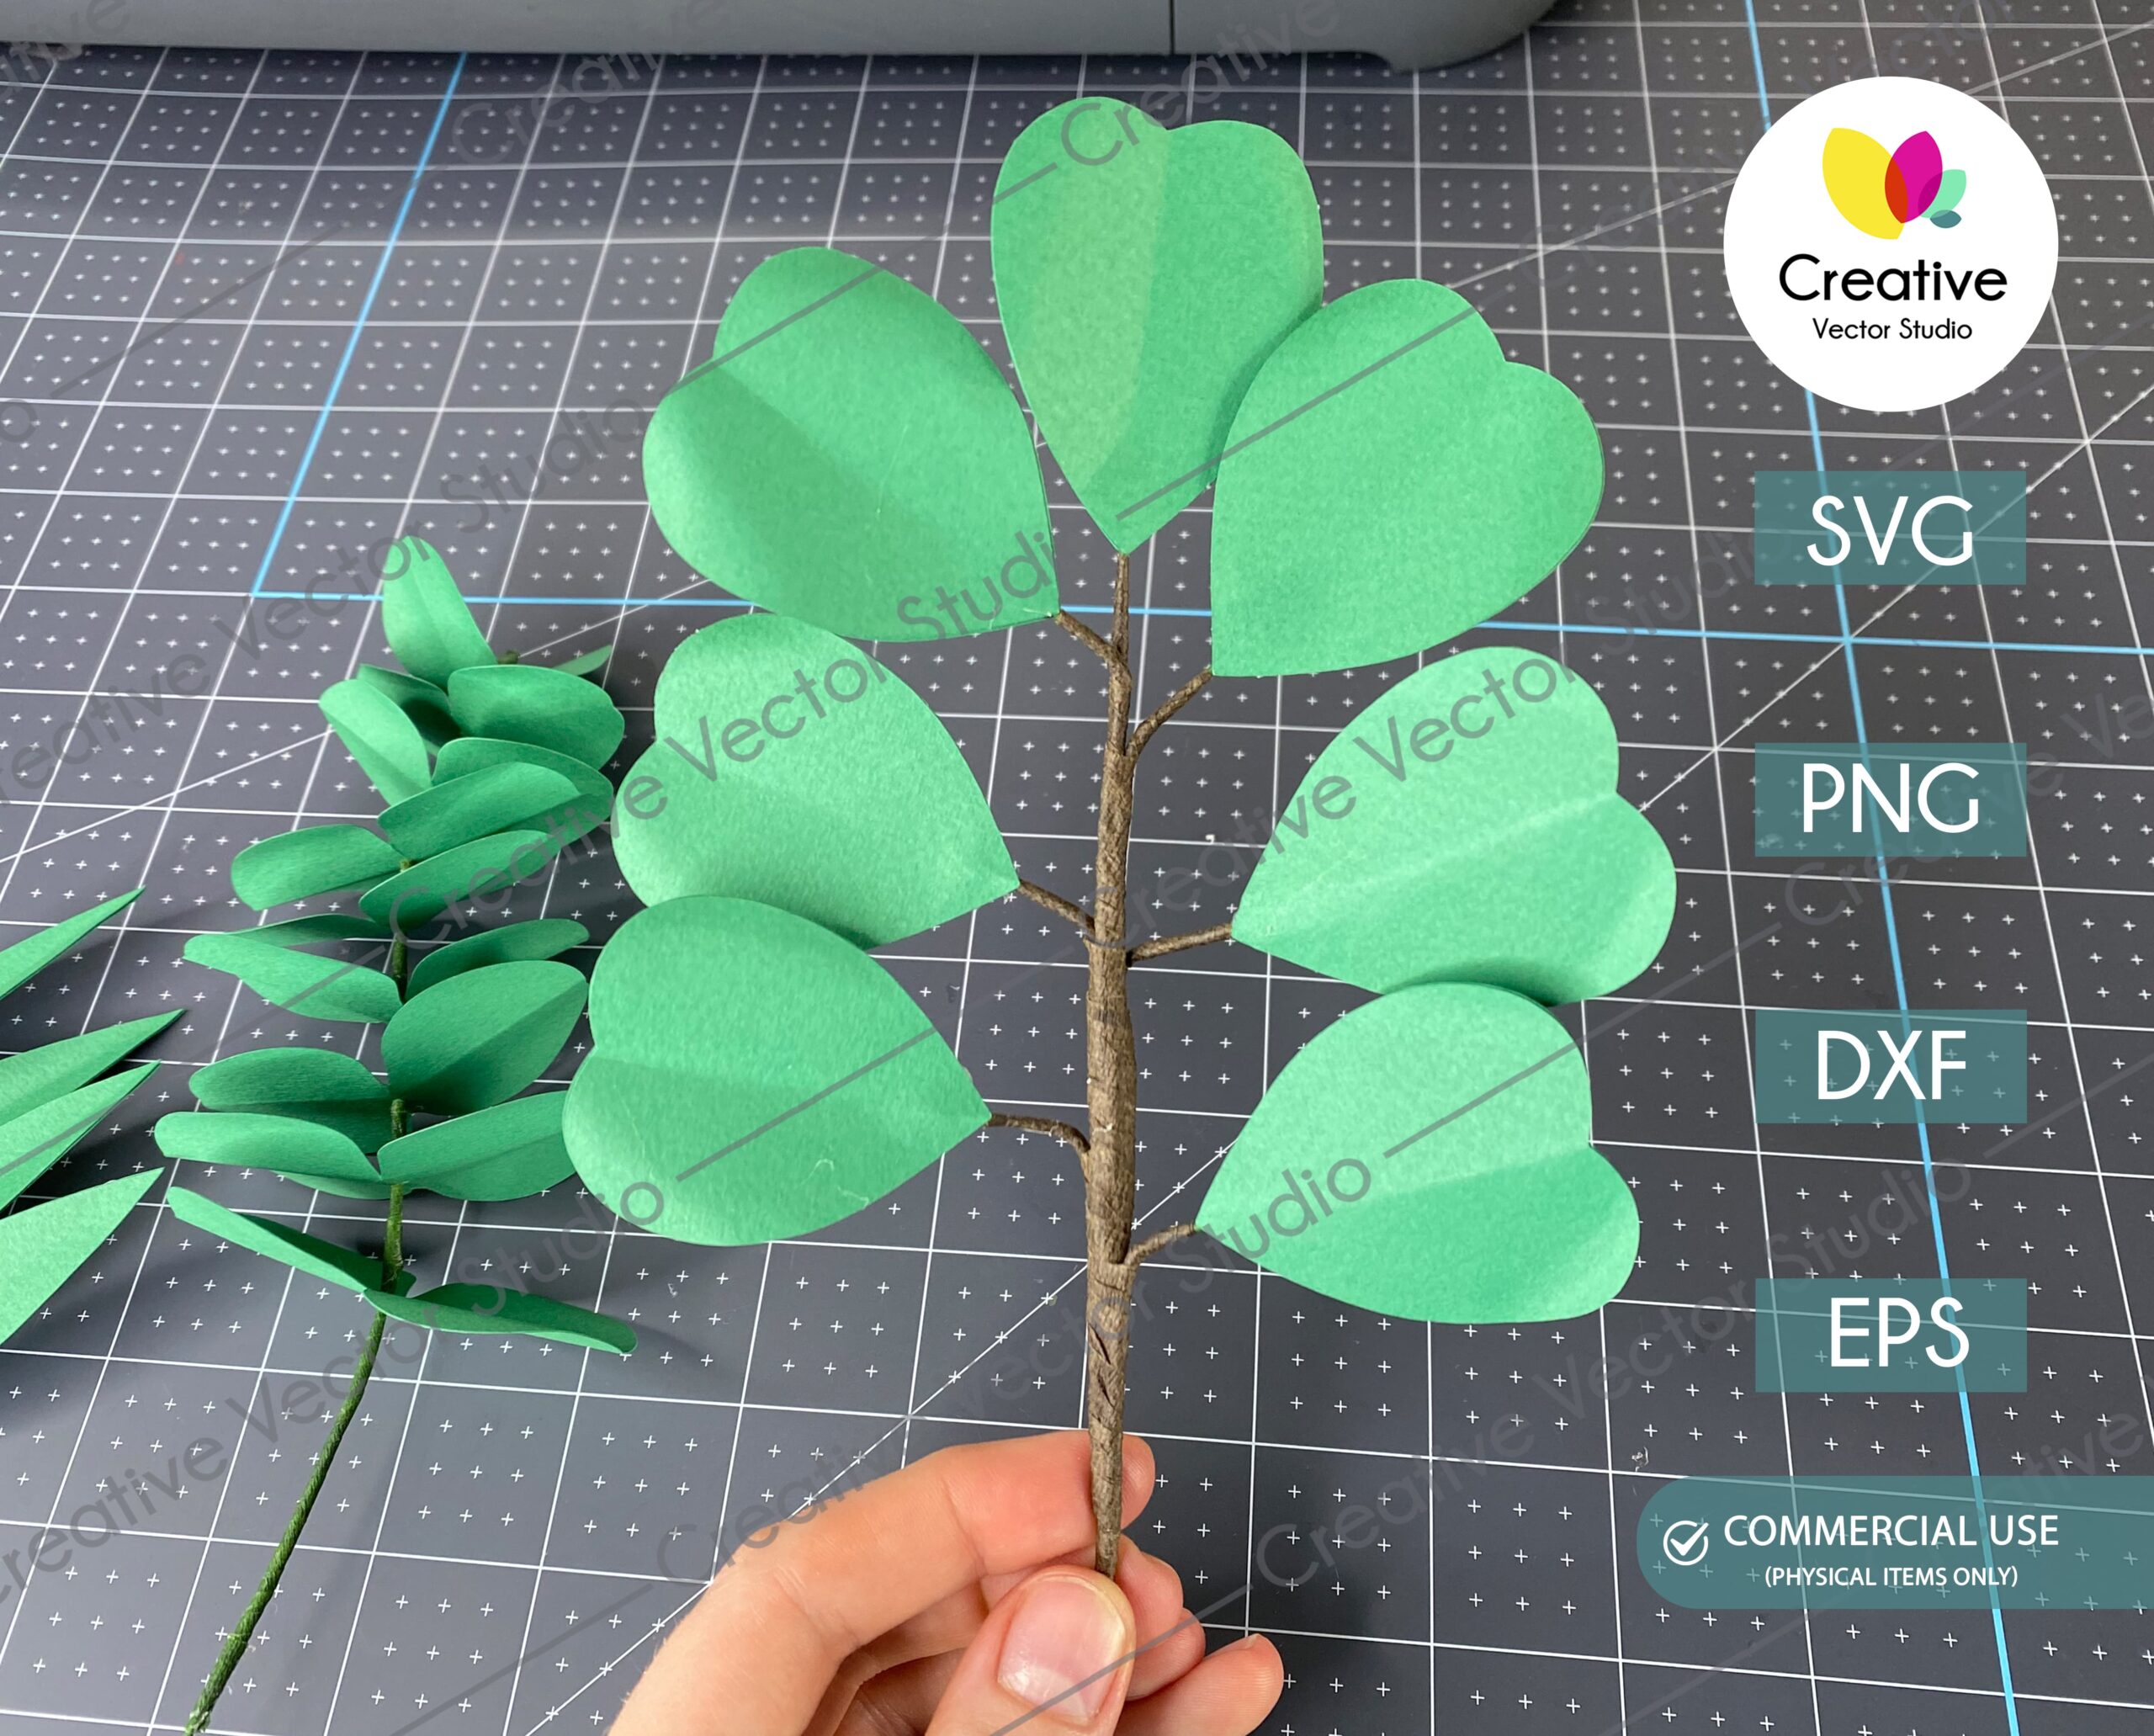 Paper Leaves Bundle Graphic by creative.vector.studio · Creative